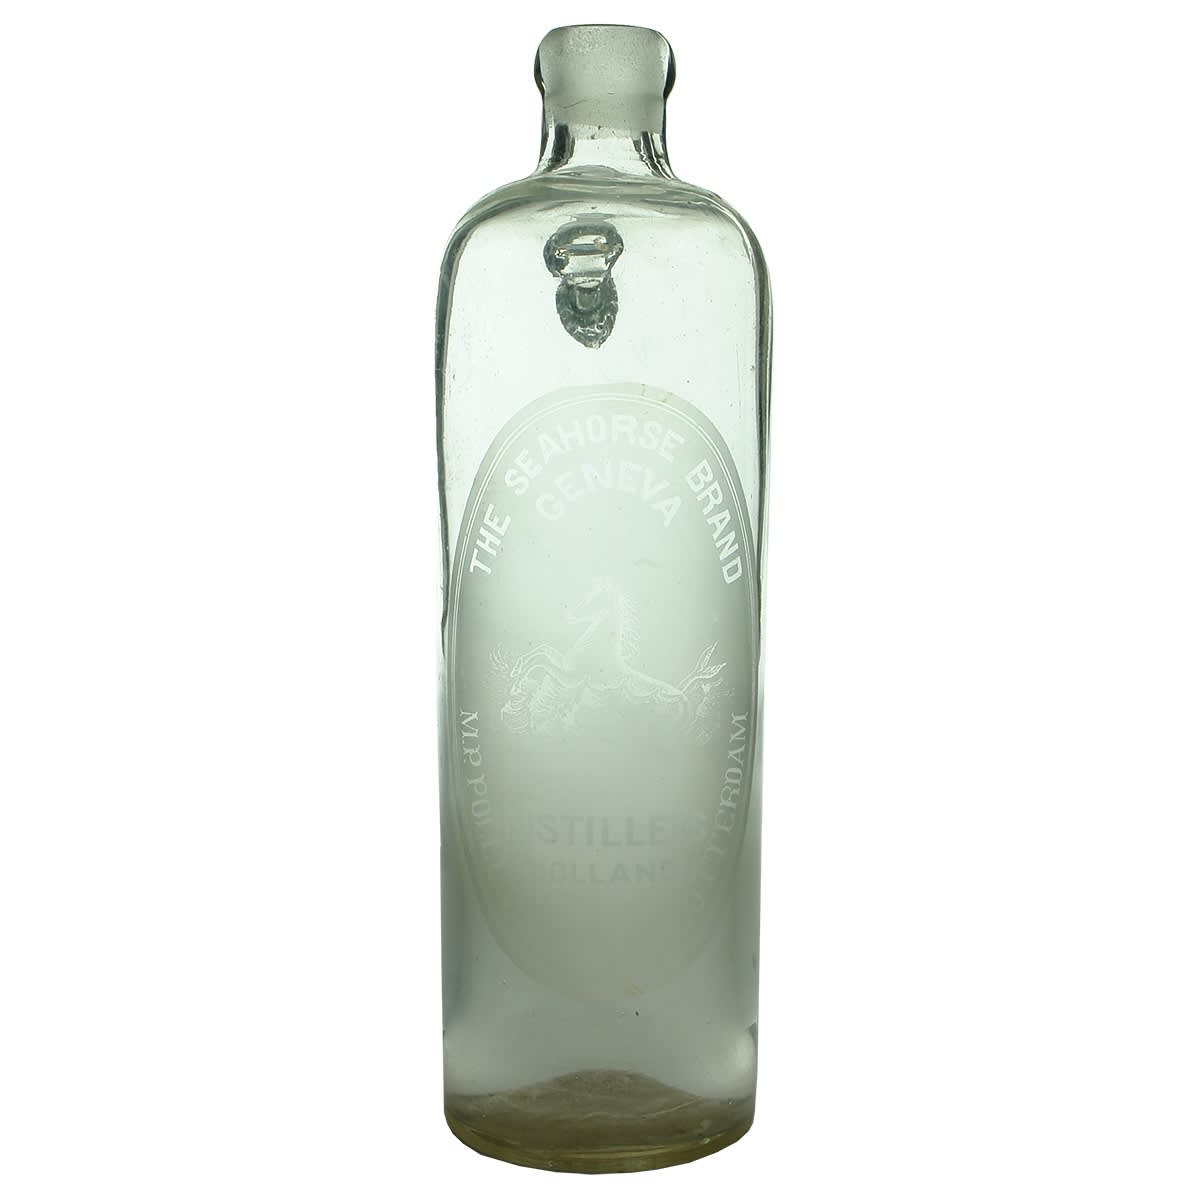 Gin. Seahorse Brand. Pollen & Zoon Rotterdam. Clear. Handled decanter. 26 oz.